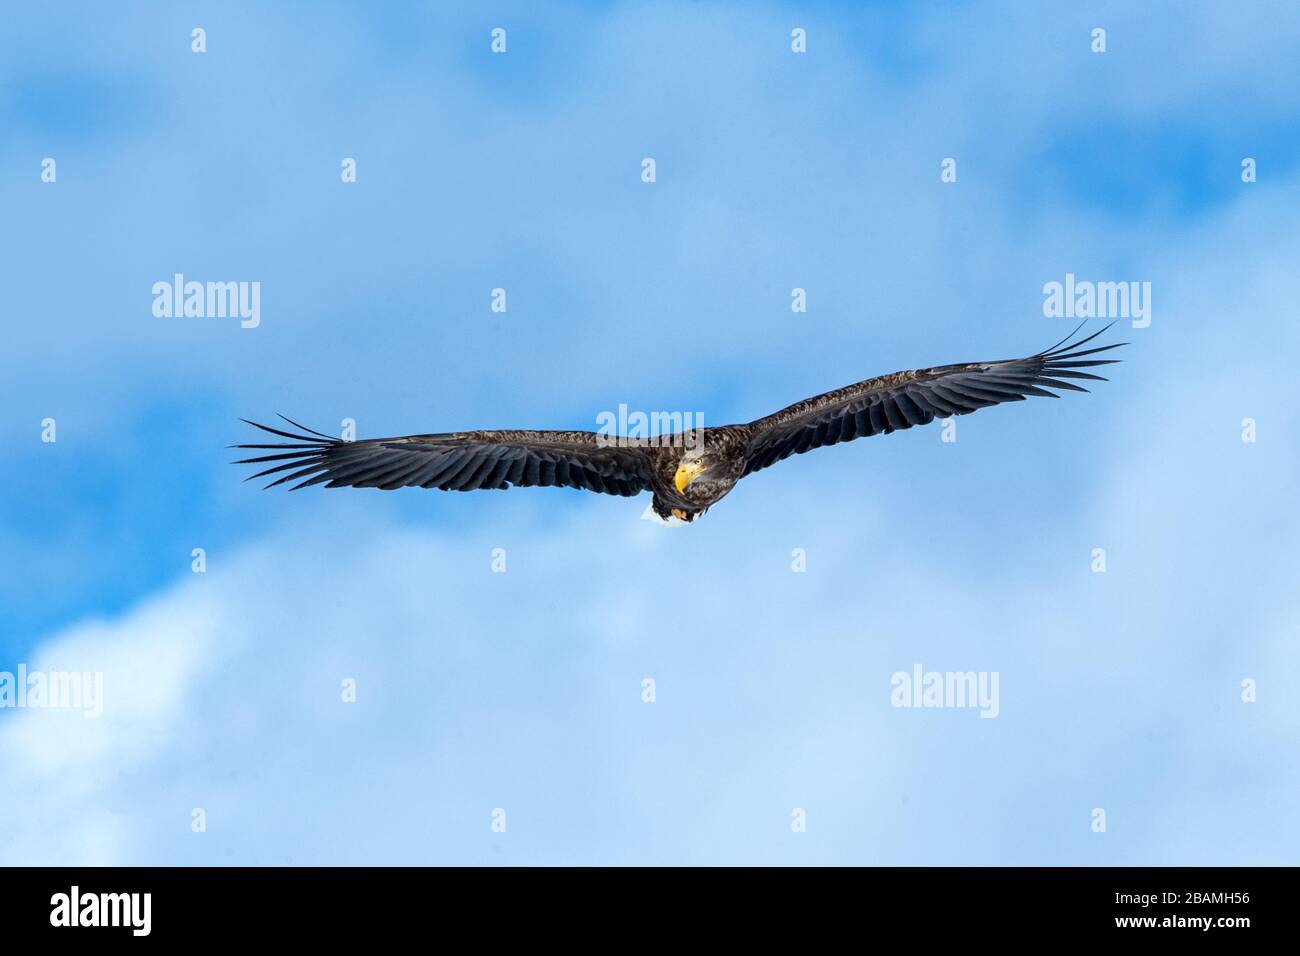 White-tailed eagle in flight, eagle flying against blue sky with clouds in Hokkaido, Japan, silhouette of eagle at sunrise, majestic sea eagle, wallpa Stock Photo